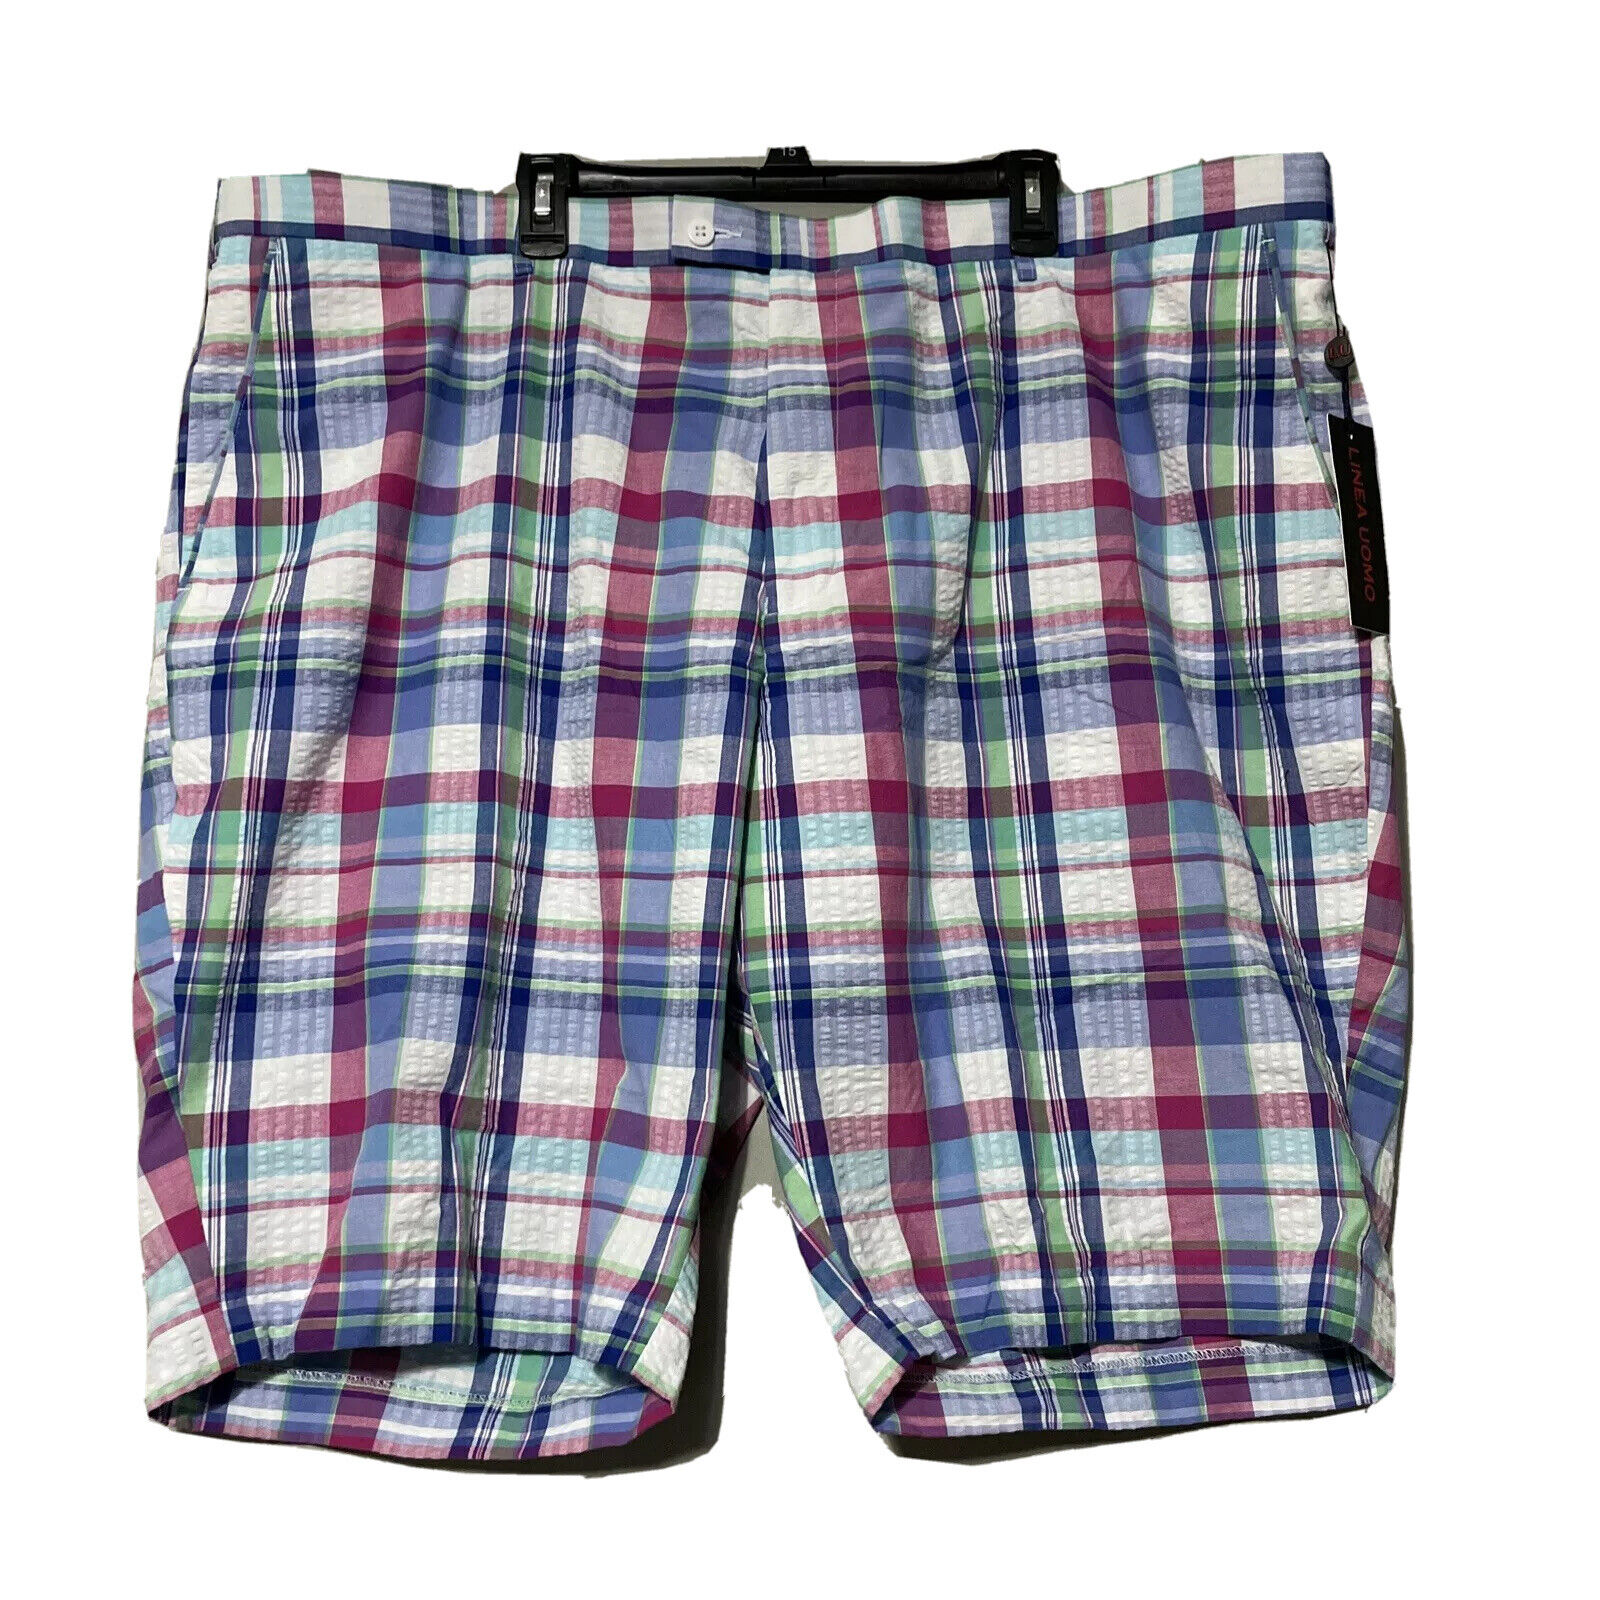 Linea Quantity limited Uomo Mens Pink Purple Teal Plaid Size Blend Cotton Shorts Inventory cleanup selling sale